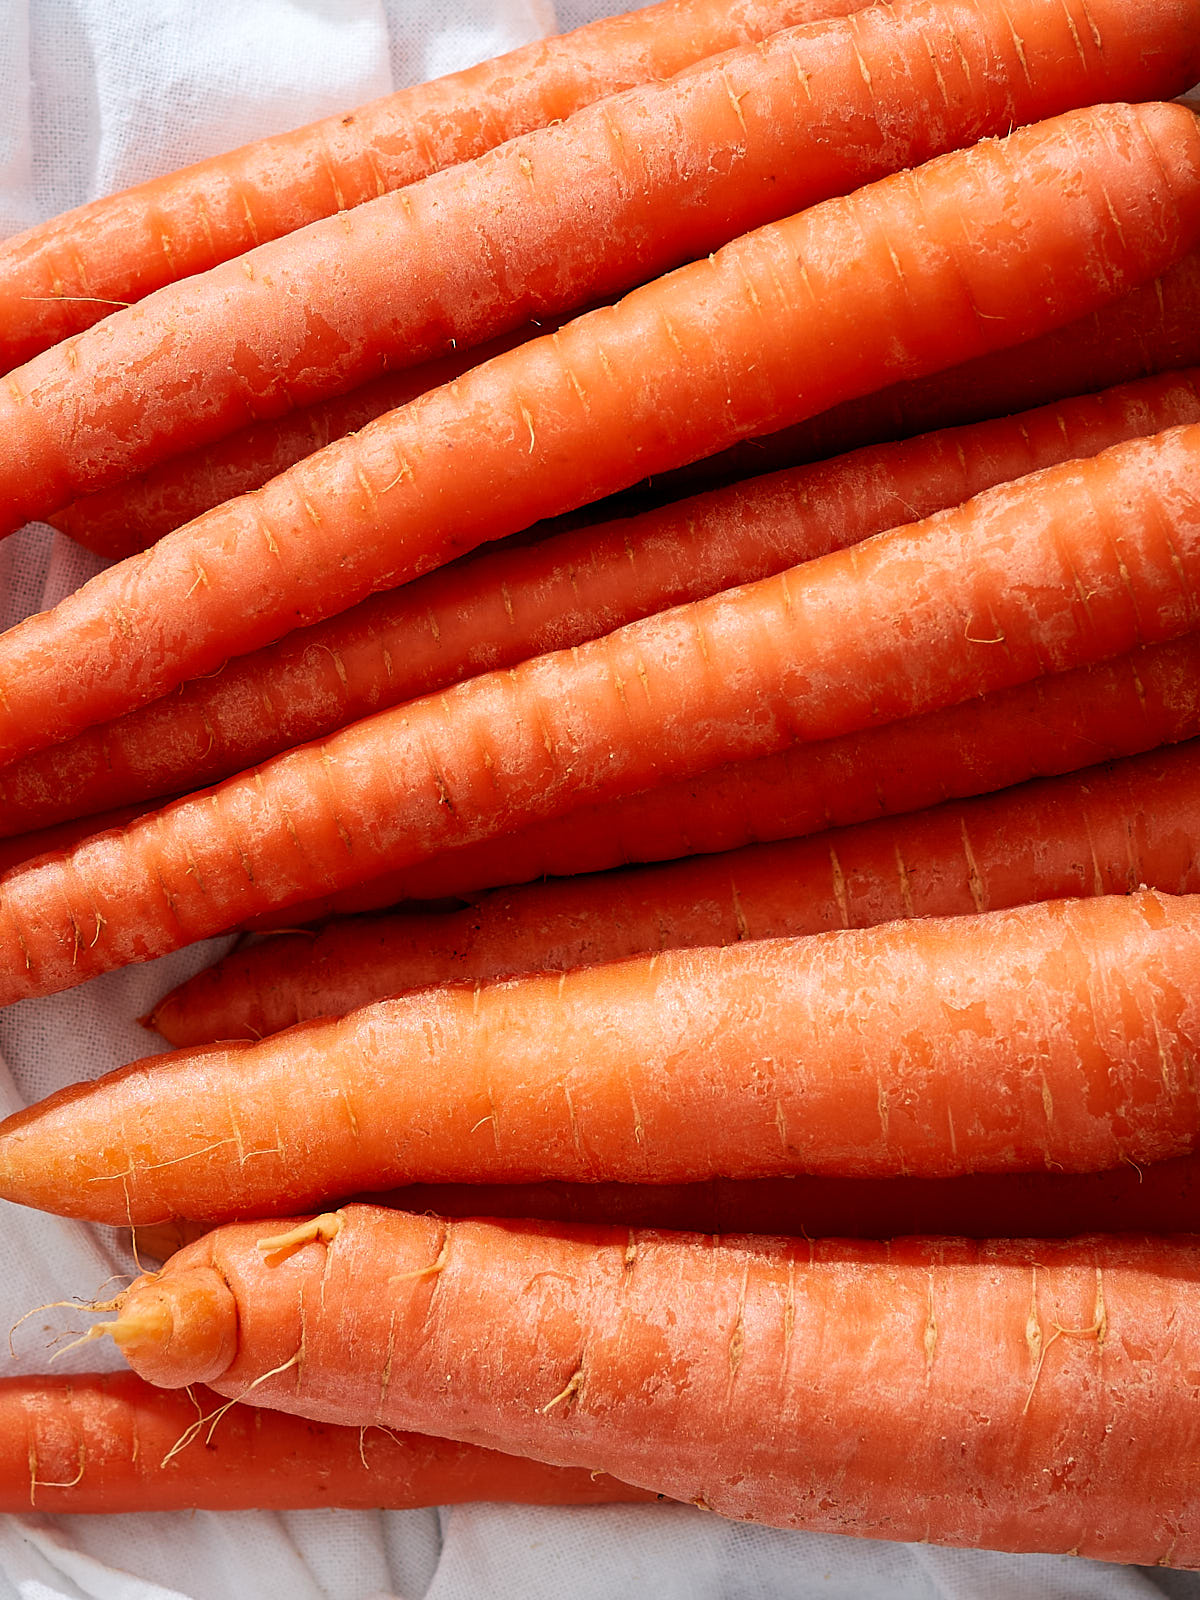 Closeup of a pile of freshly washed carrots.